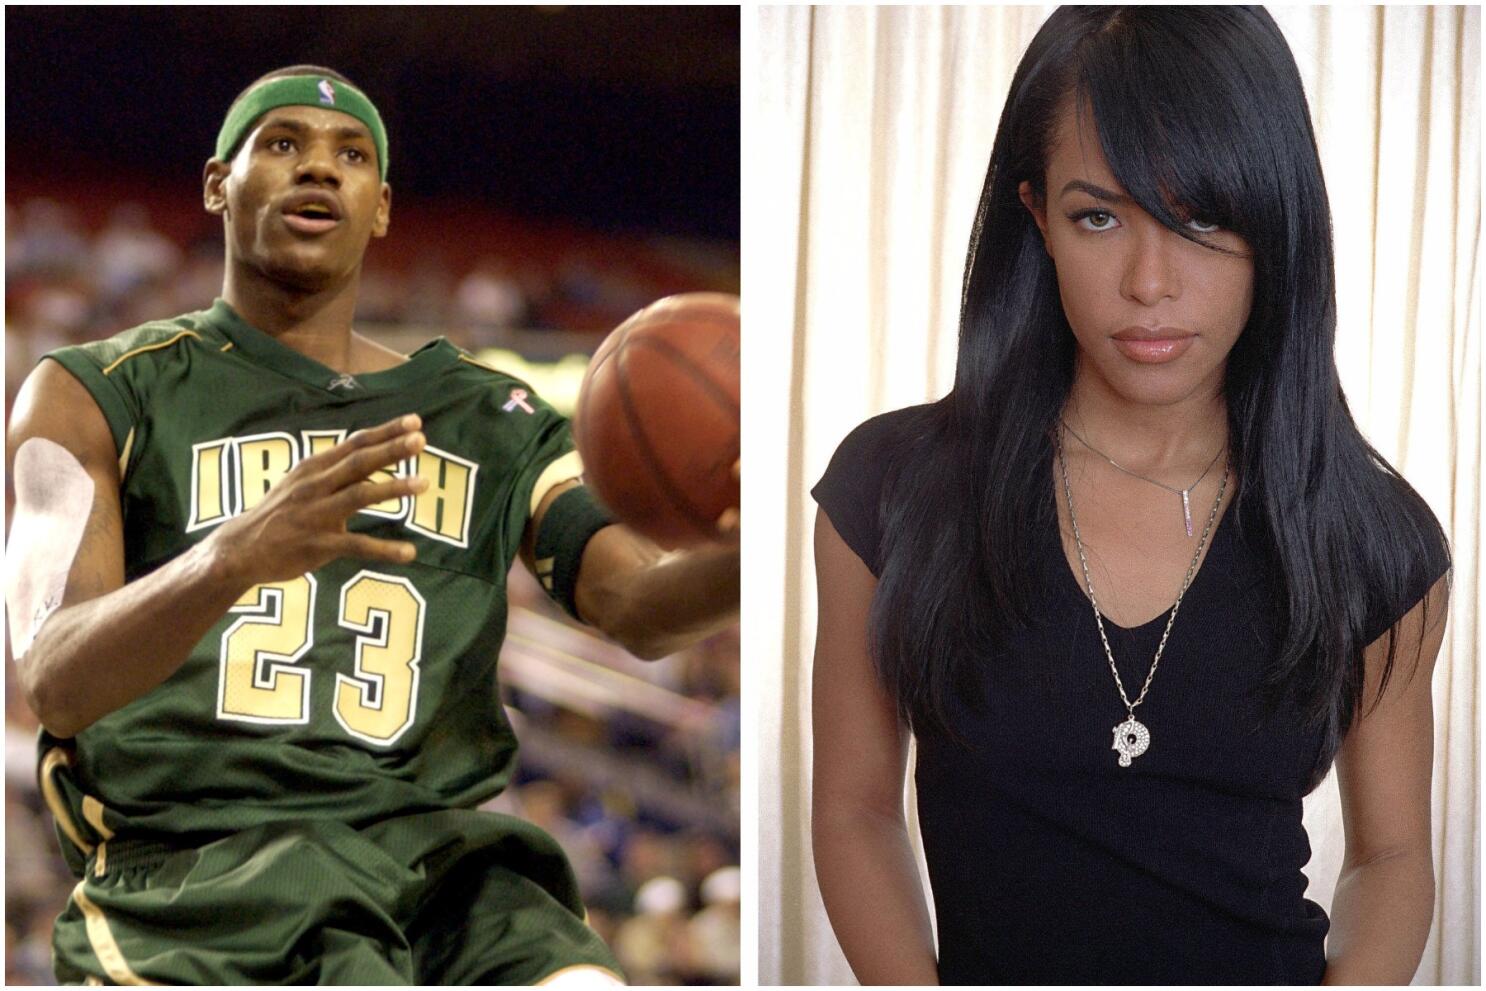 Aaliyah's death influenced LeBron James' sports career - Los Angeles Times